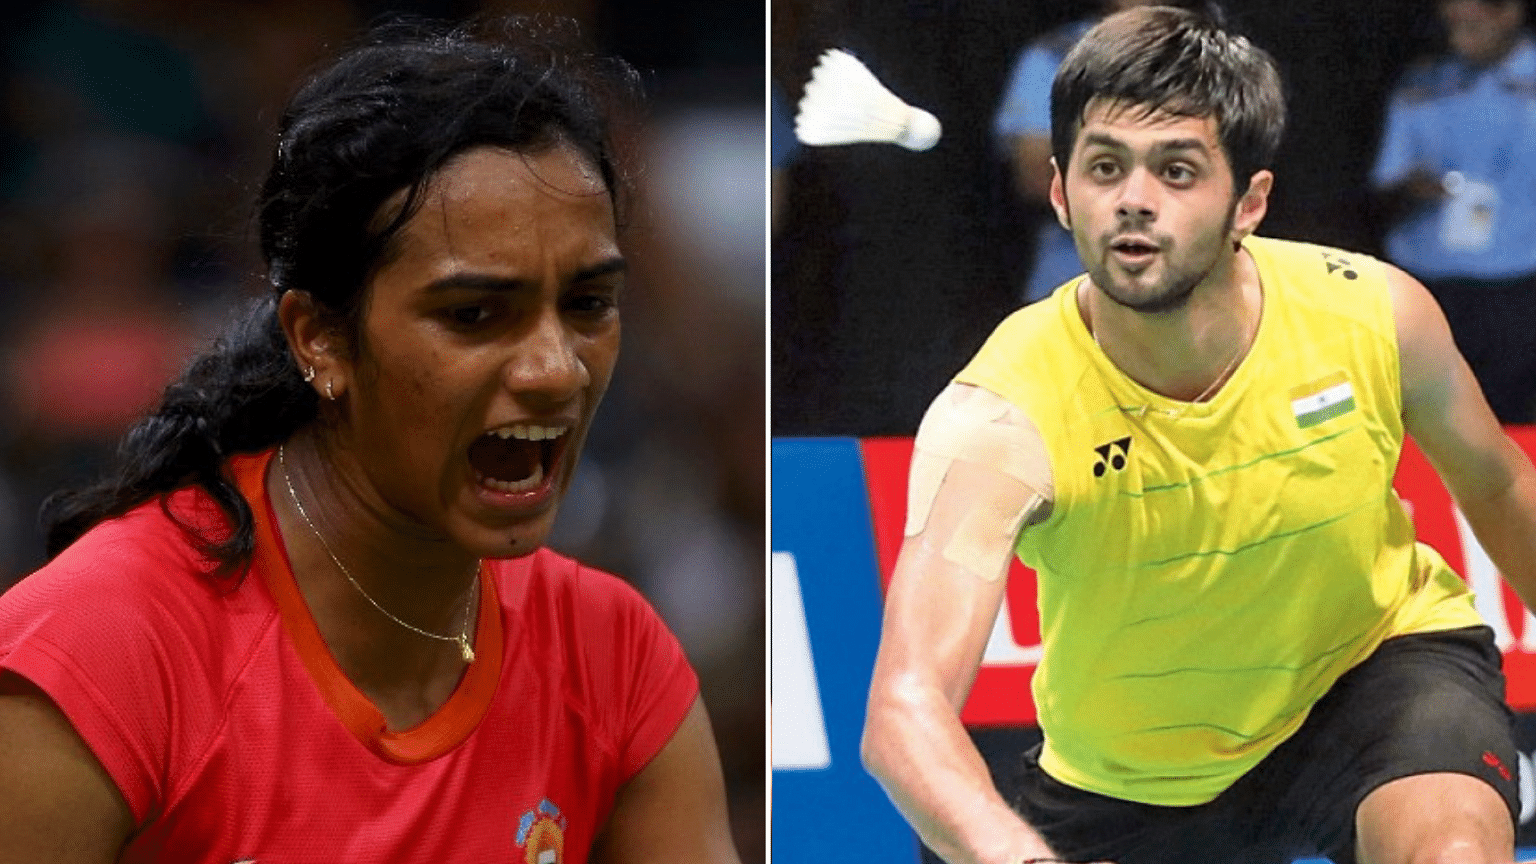 Sindhu (left) and Praneeth had contrasting wins in their respective events at the Japan Open on Thursday.